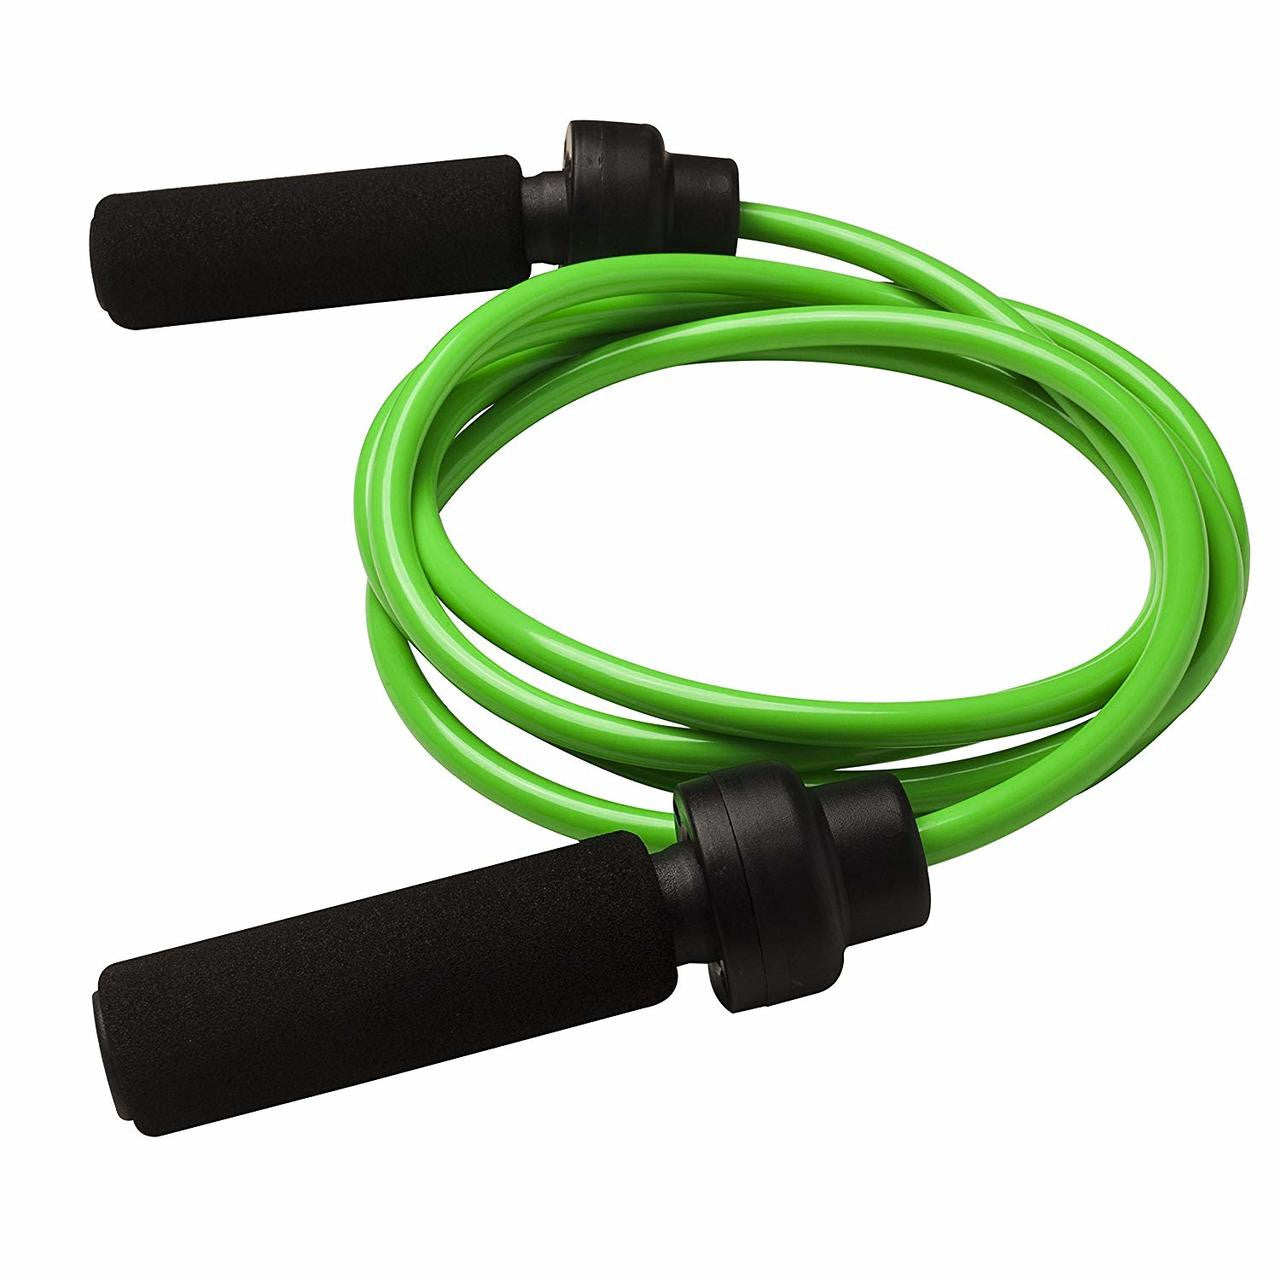 1 lb weighted jump rope